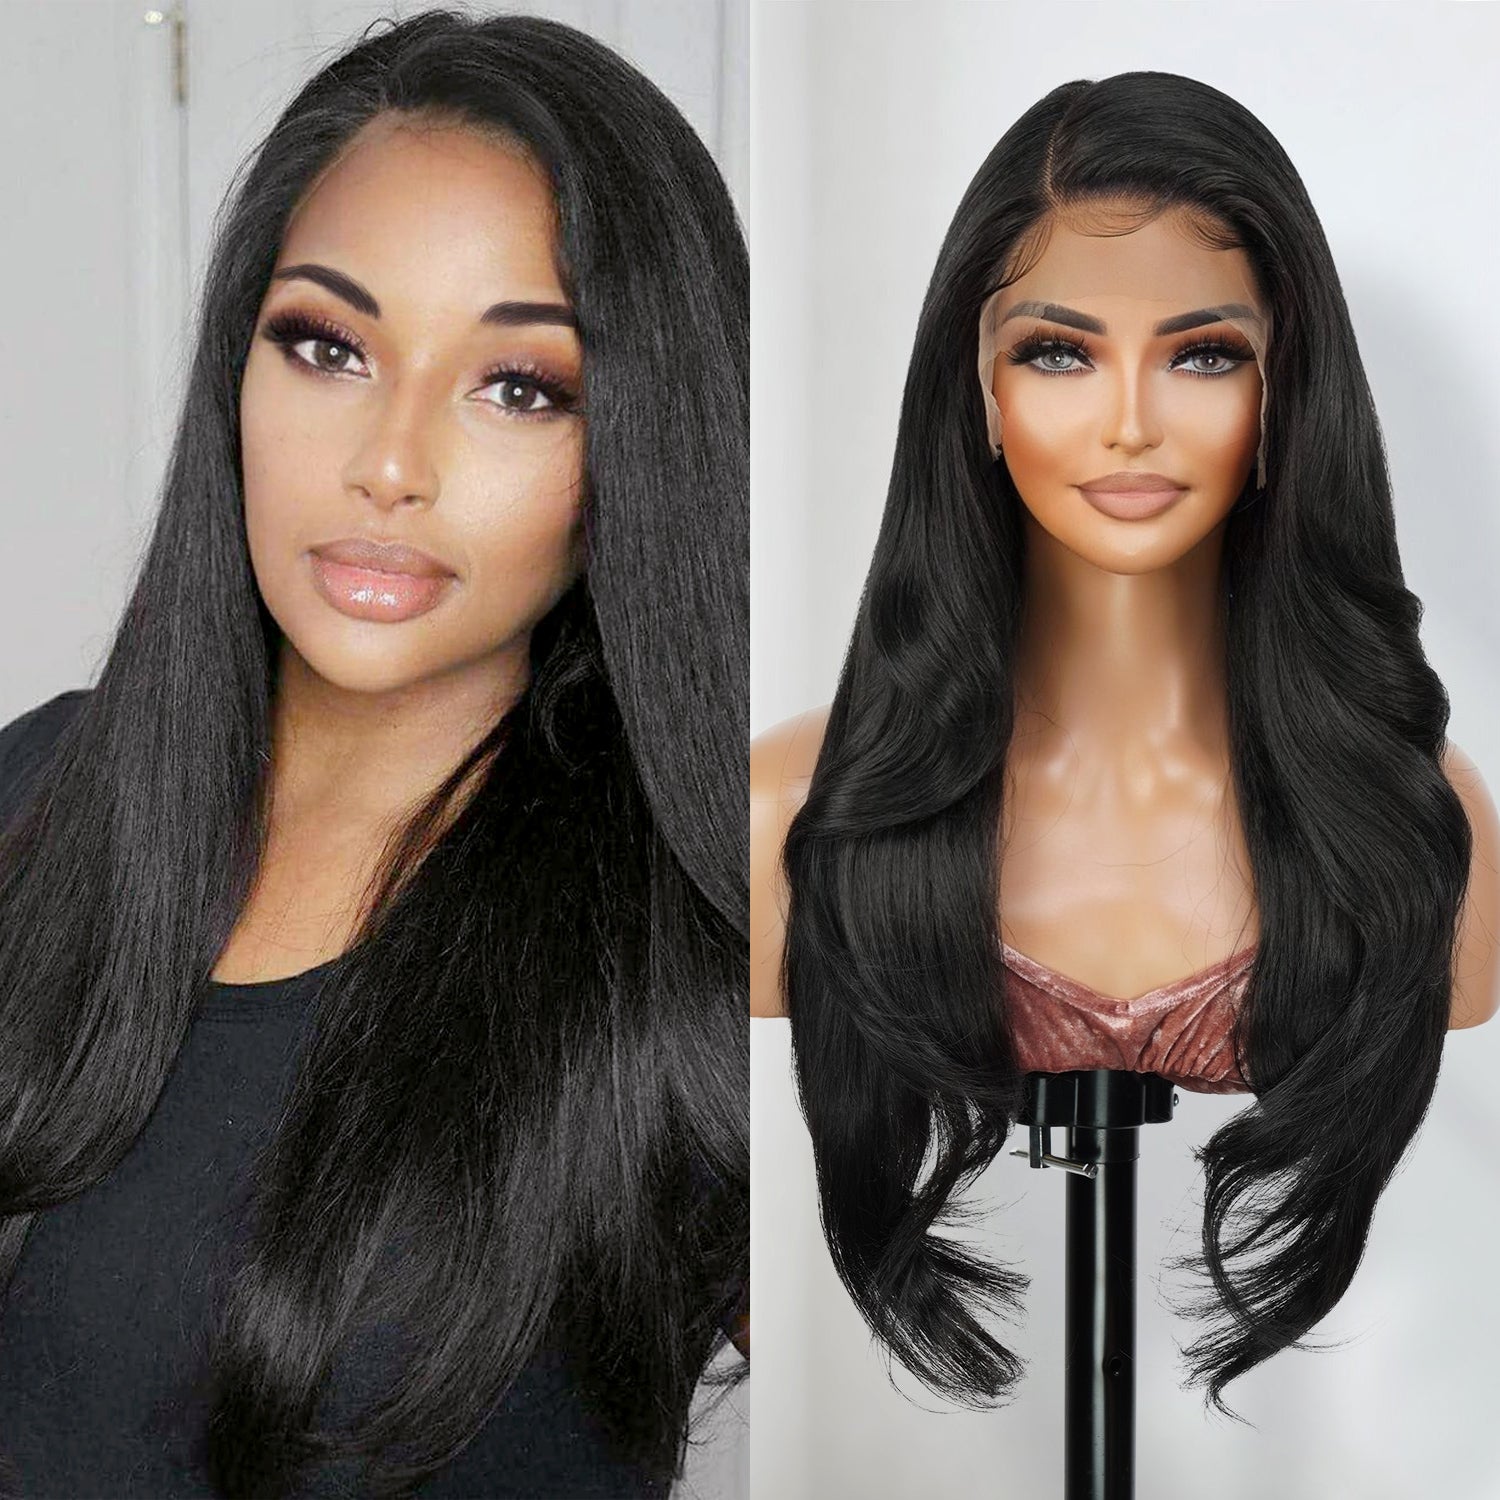 Multi-Parting, 13X6, Human Hair Blend, Frontal Wig, Invisible Lace, Pre-Plucked, Textured Wig, Yaki Textured, Face-Frame Layers, Long-Layered Wig, Blowout Texture, 